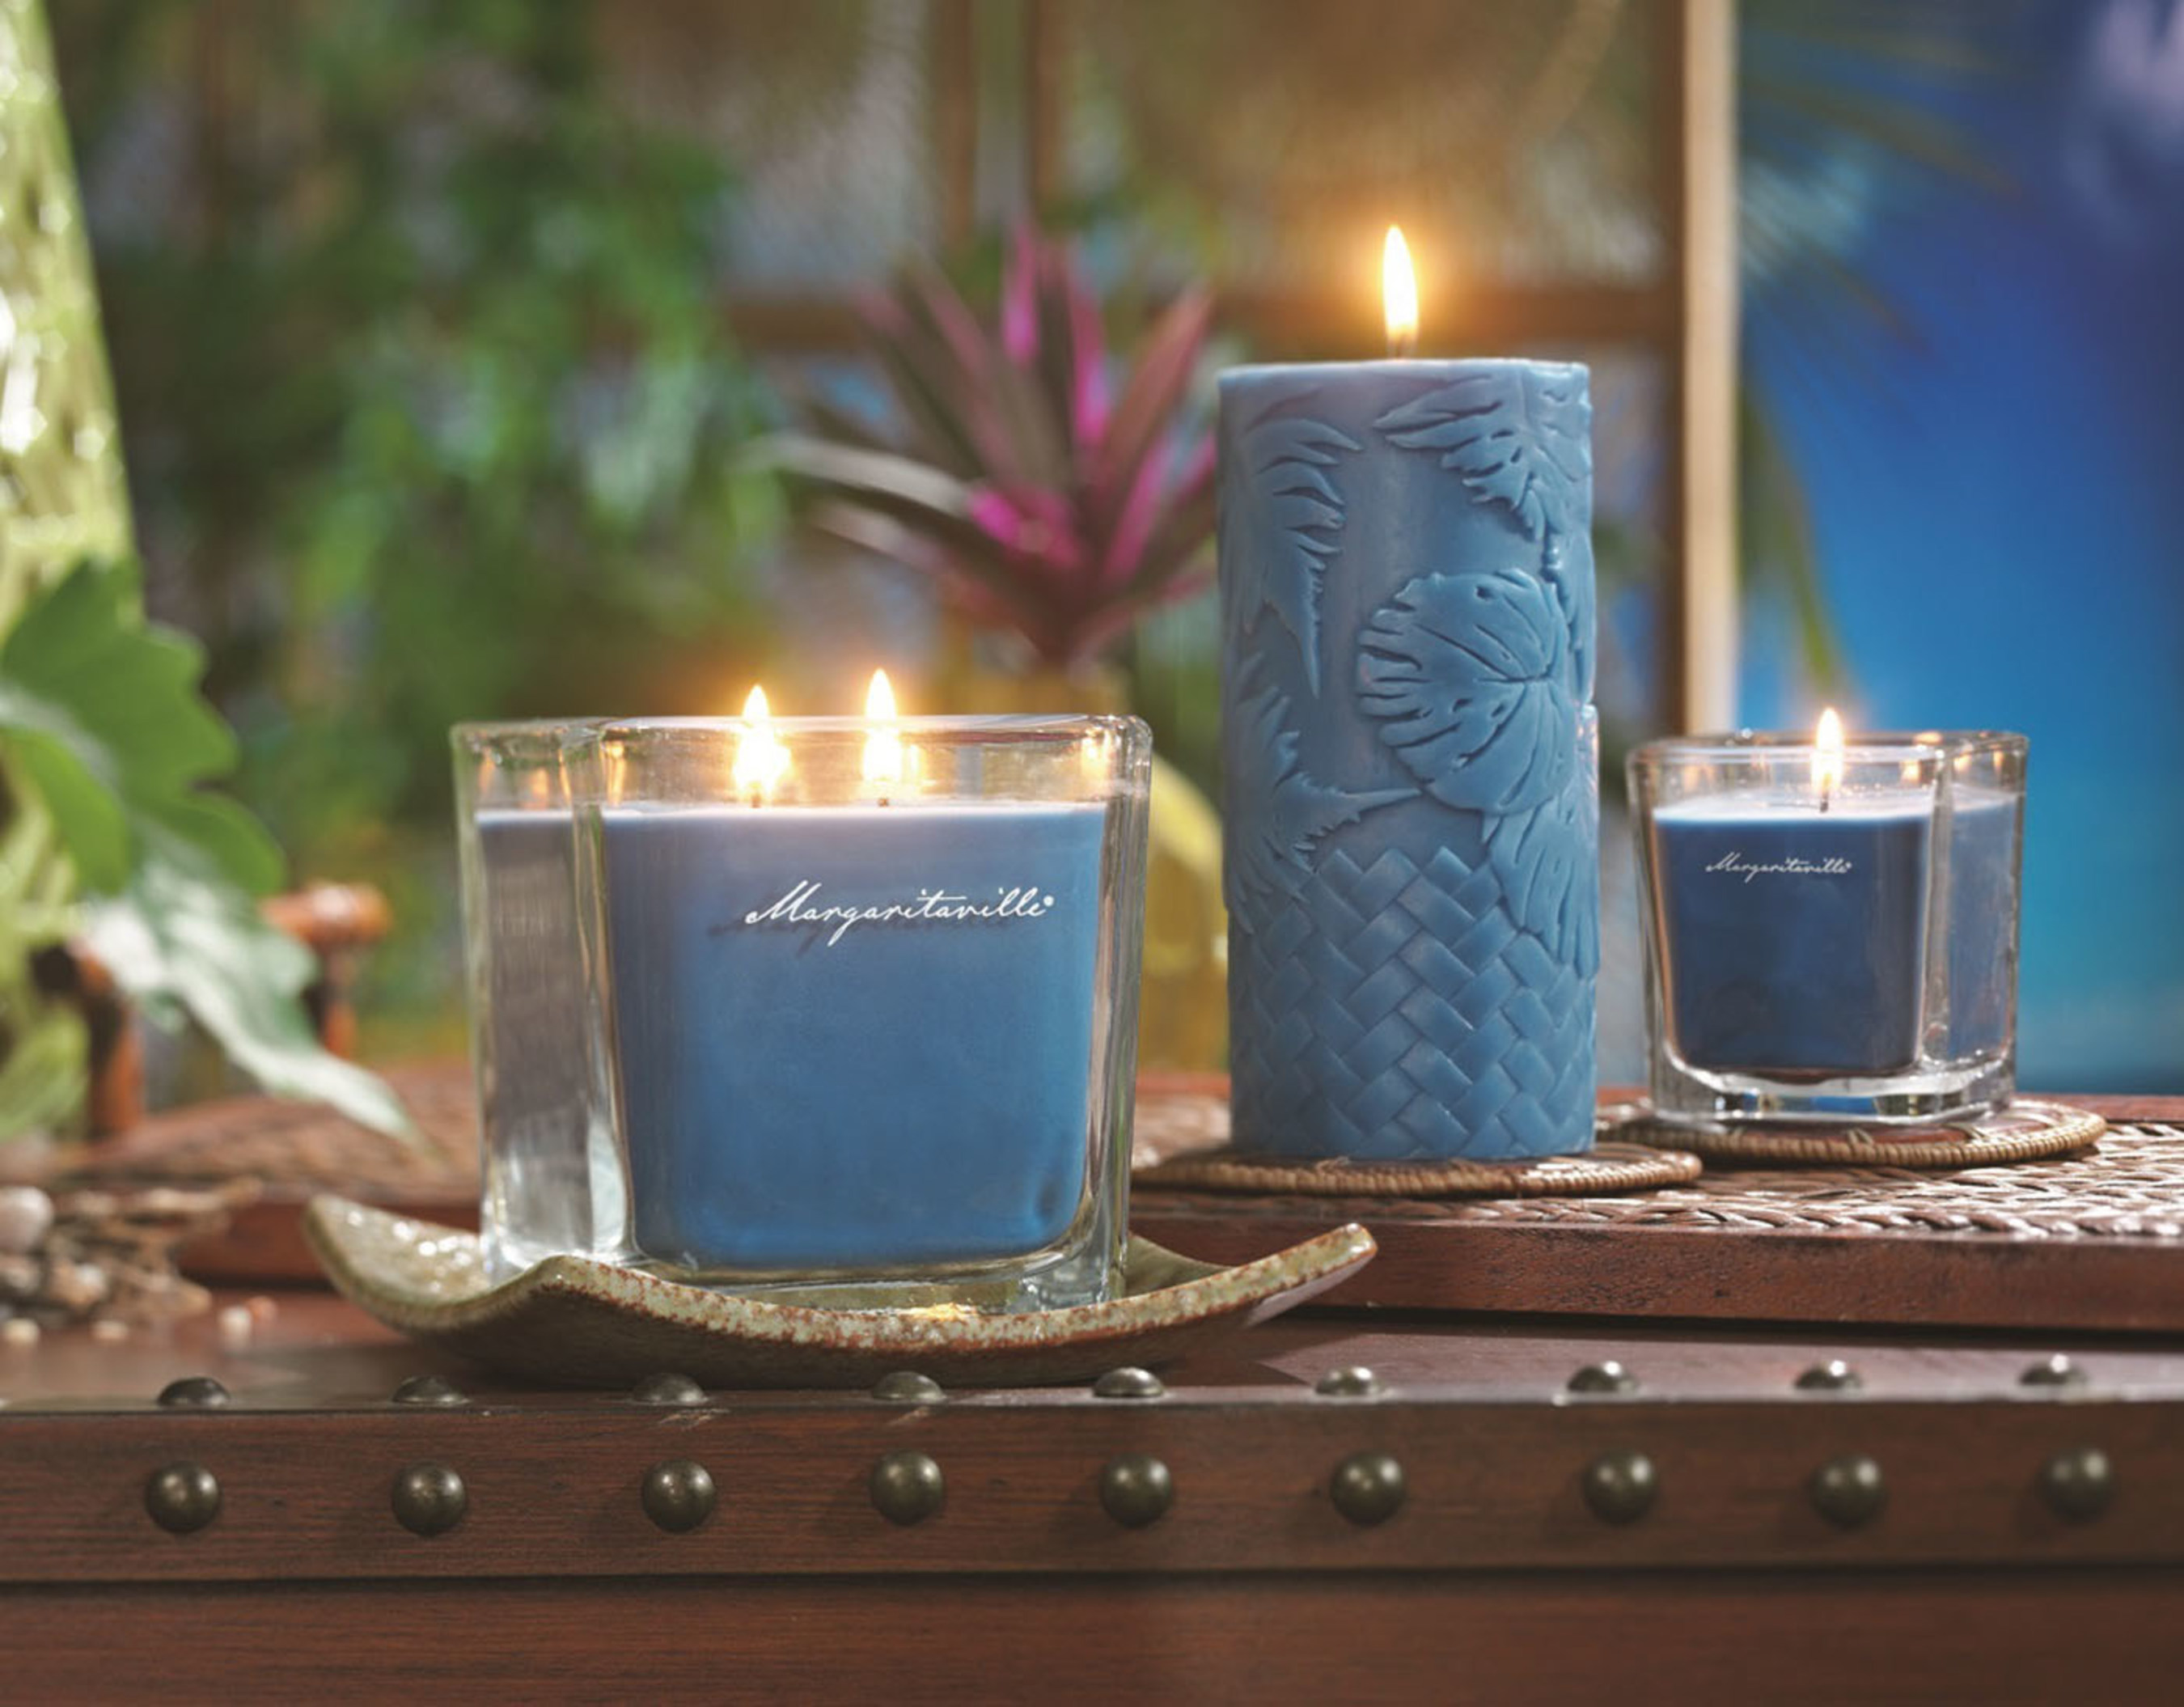 One of the new Margaritaville(R) collection fragrances, Mother Ocean captures the island air with notes of blue lotus and lavender.